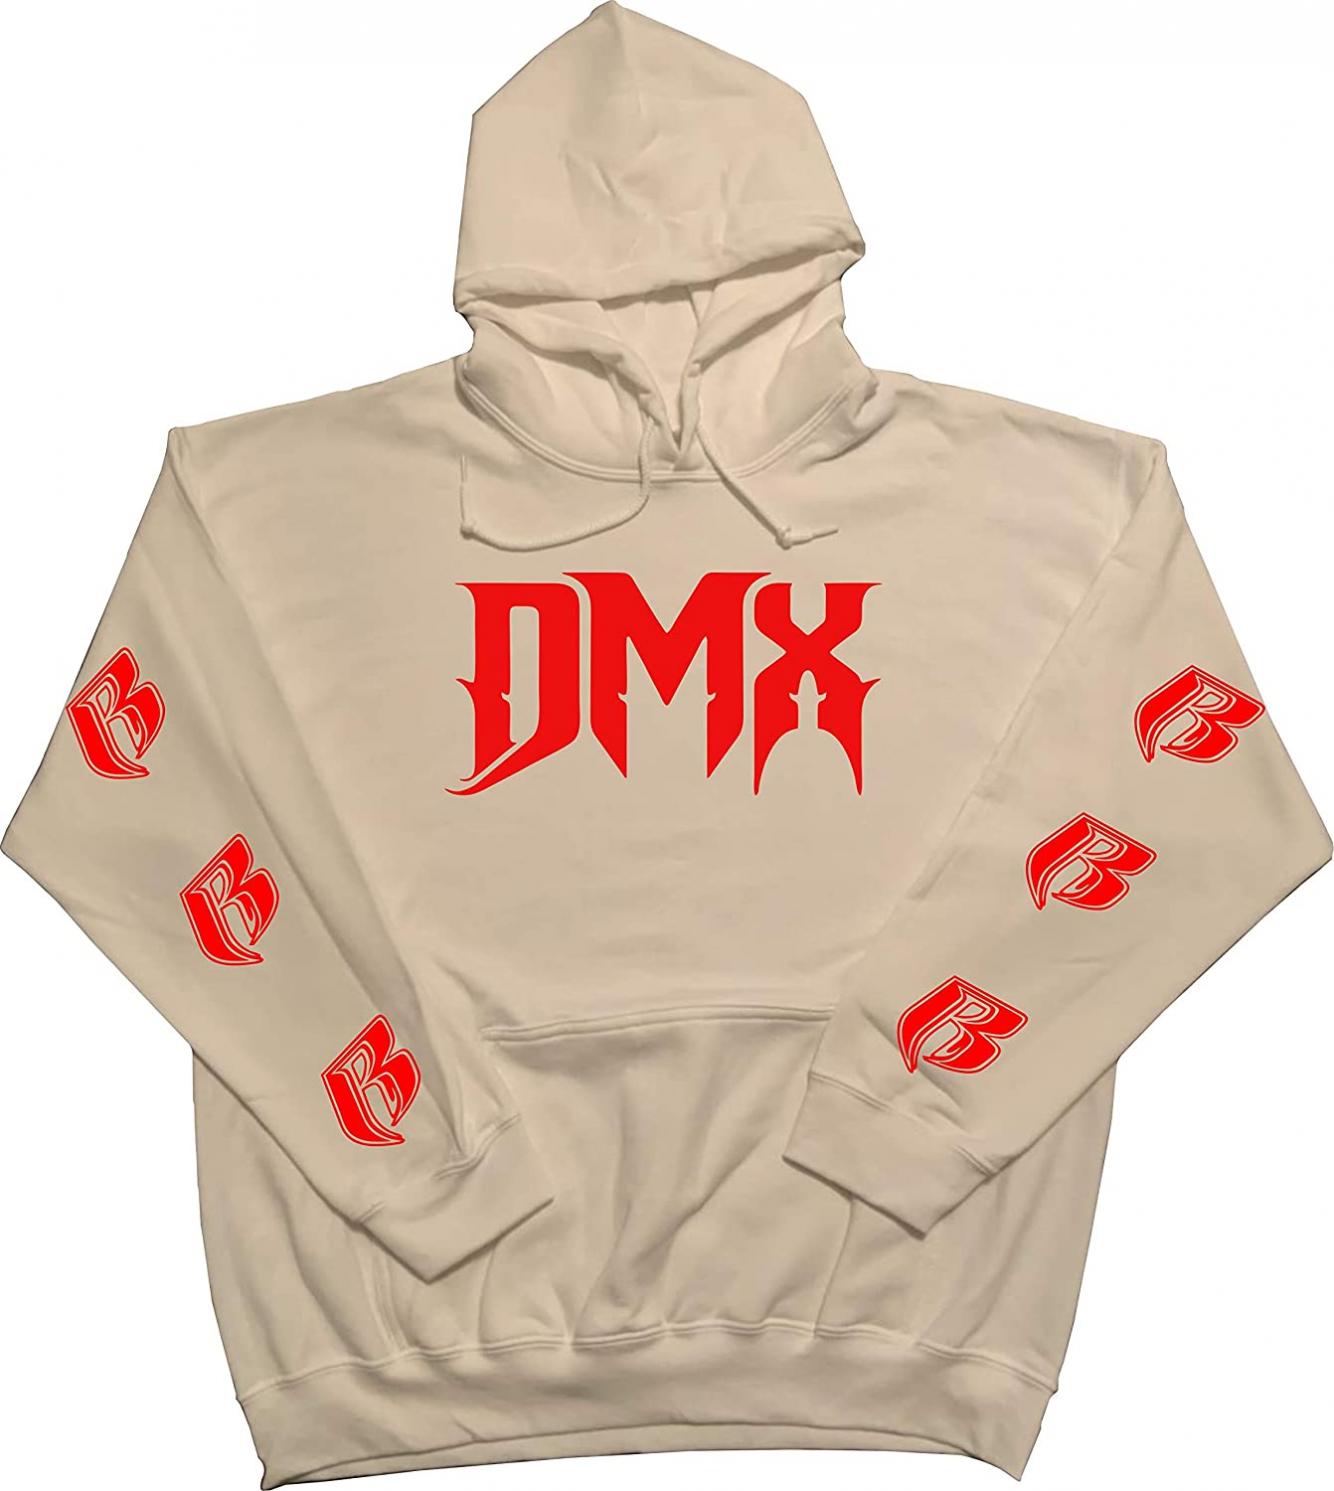 DMX Hoodie with Design on Front and Ruff Ryders Design on Sleeves White (Red Design)